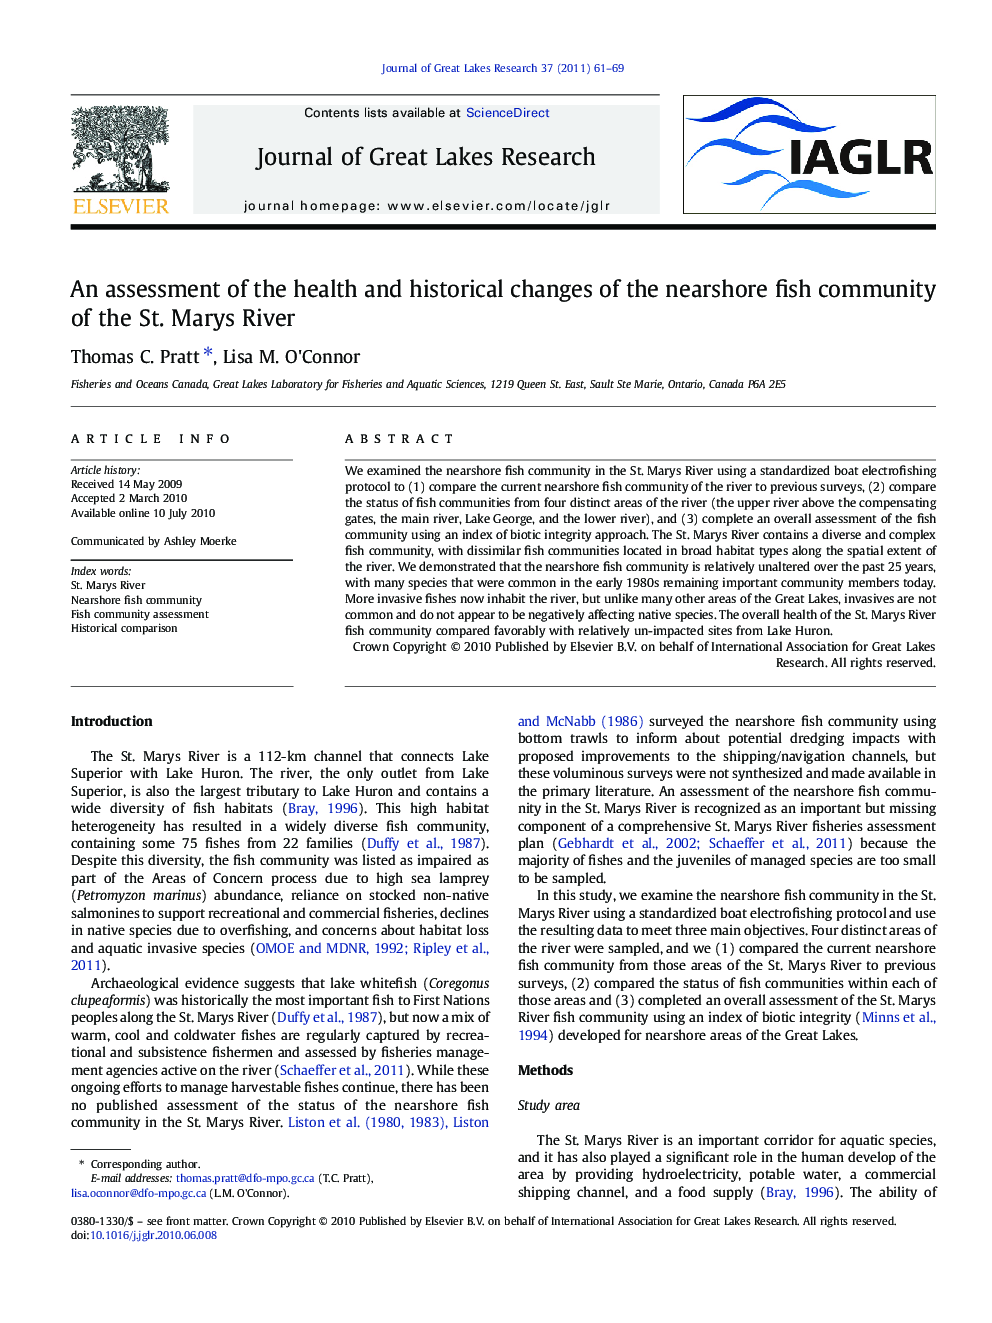 An assessment of the health and historical changes of the nearshore fish community of the St. Marys River